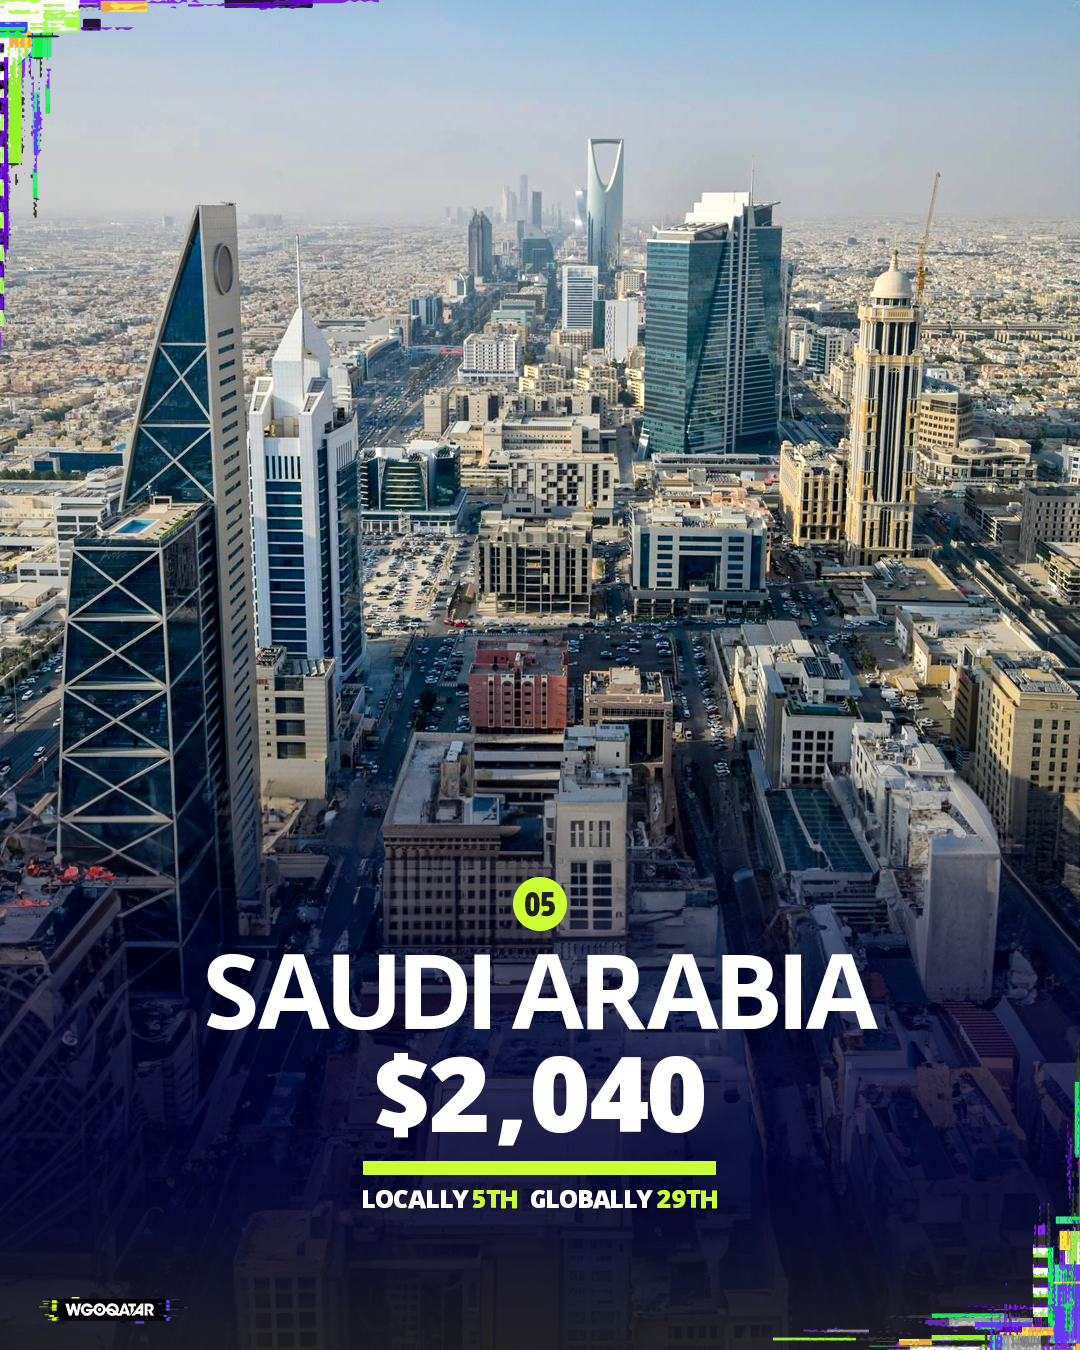 Ranking of Arab countries based on average monthly net salaries